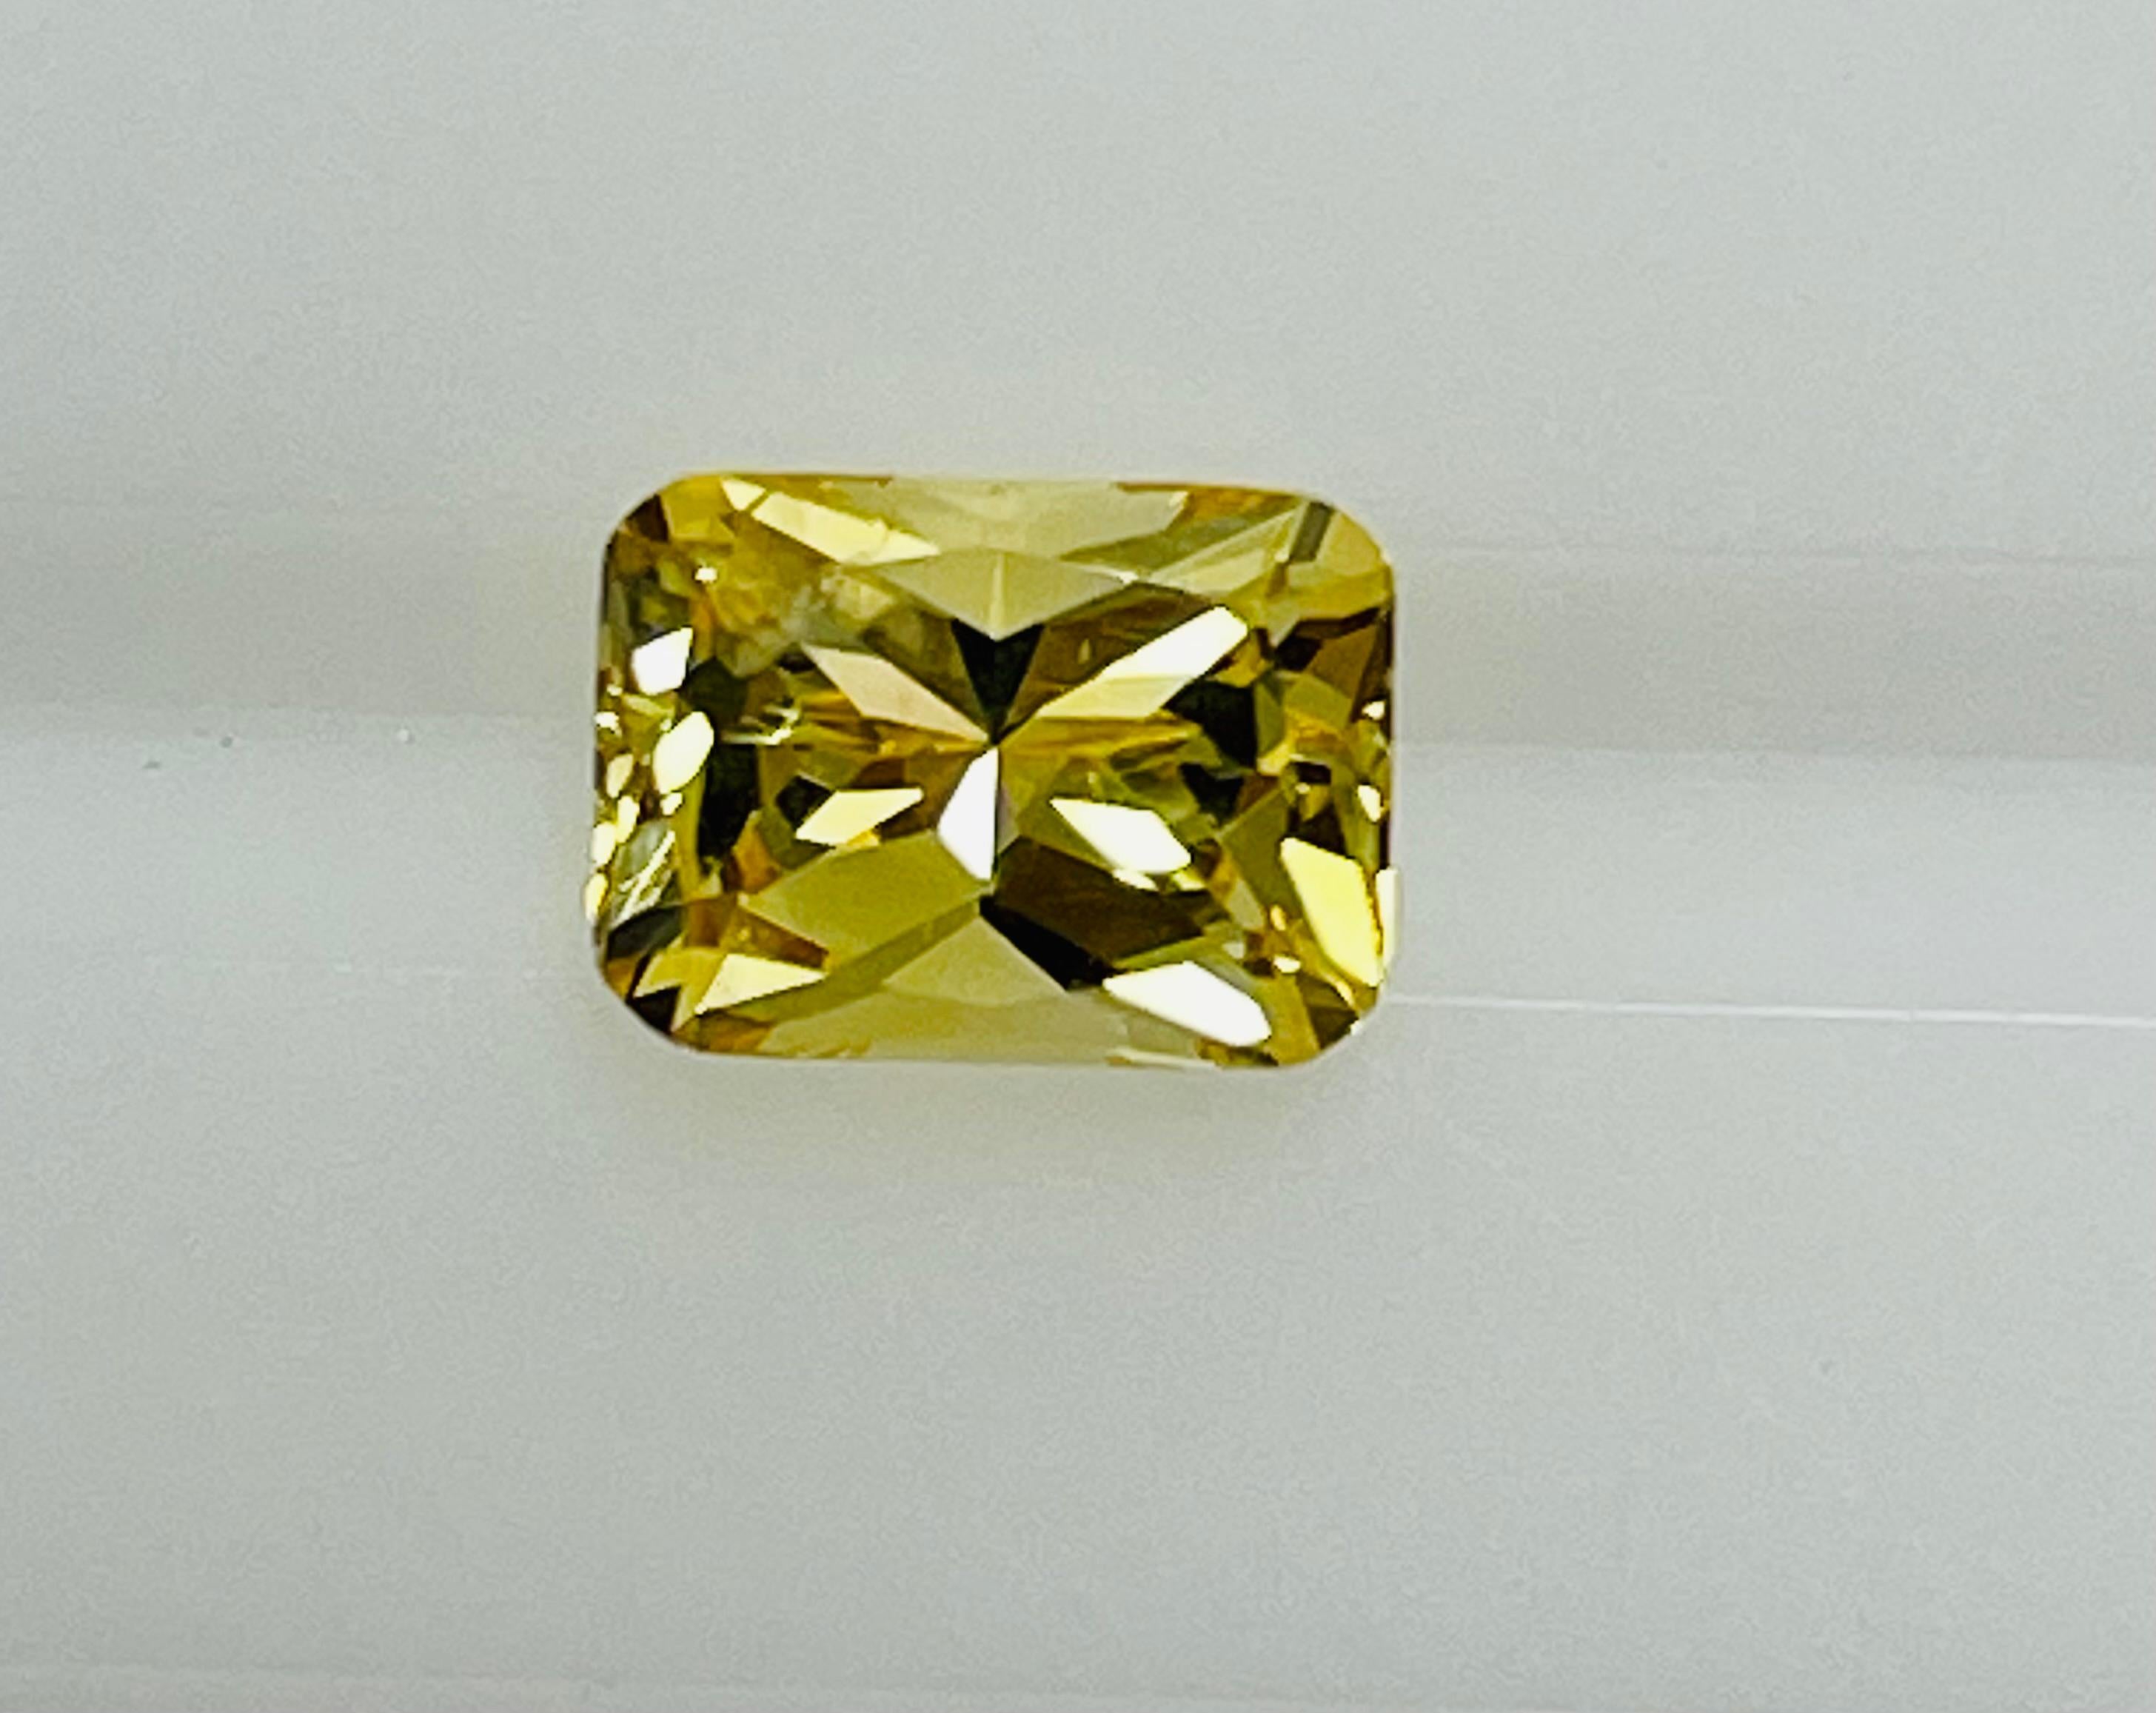 2.20 Ct Natural No Heat Radiant Yellow Sapphire. It is beautiful lively Natural Yellow Sapphire that exhibit fine yellow color as well as great cutting and nice clarity .